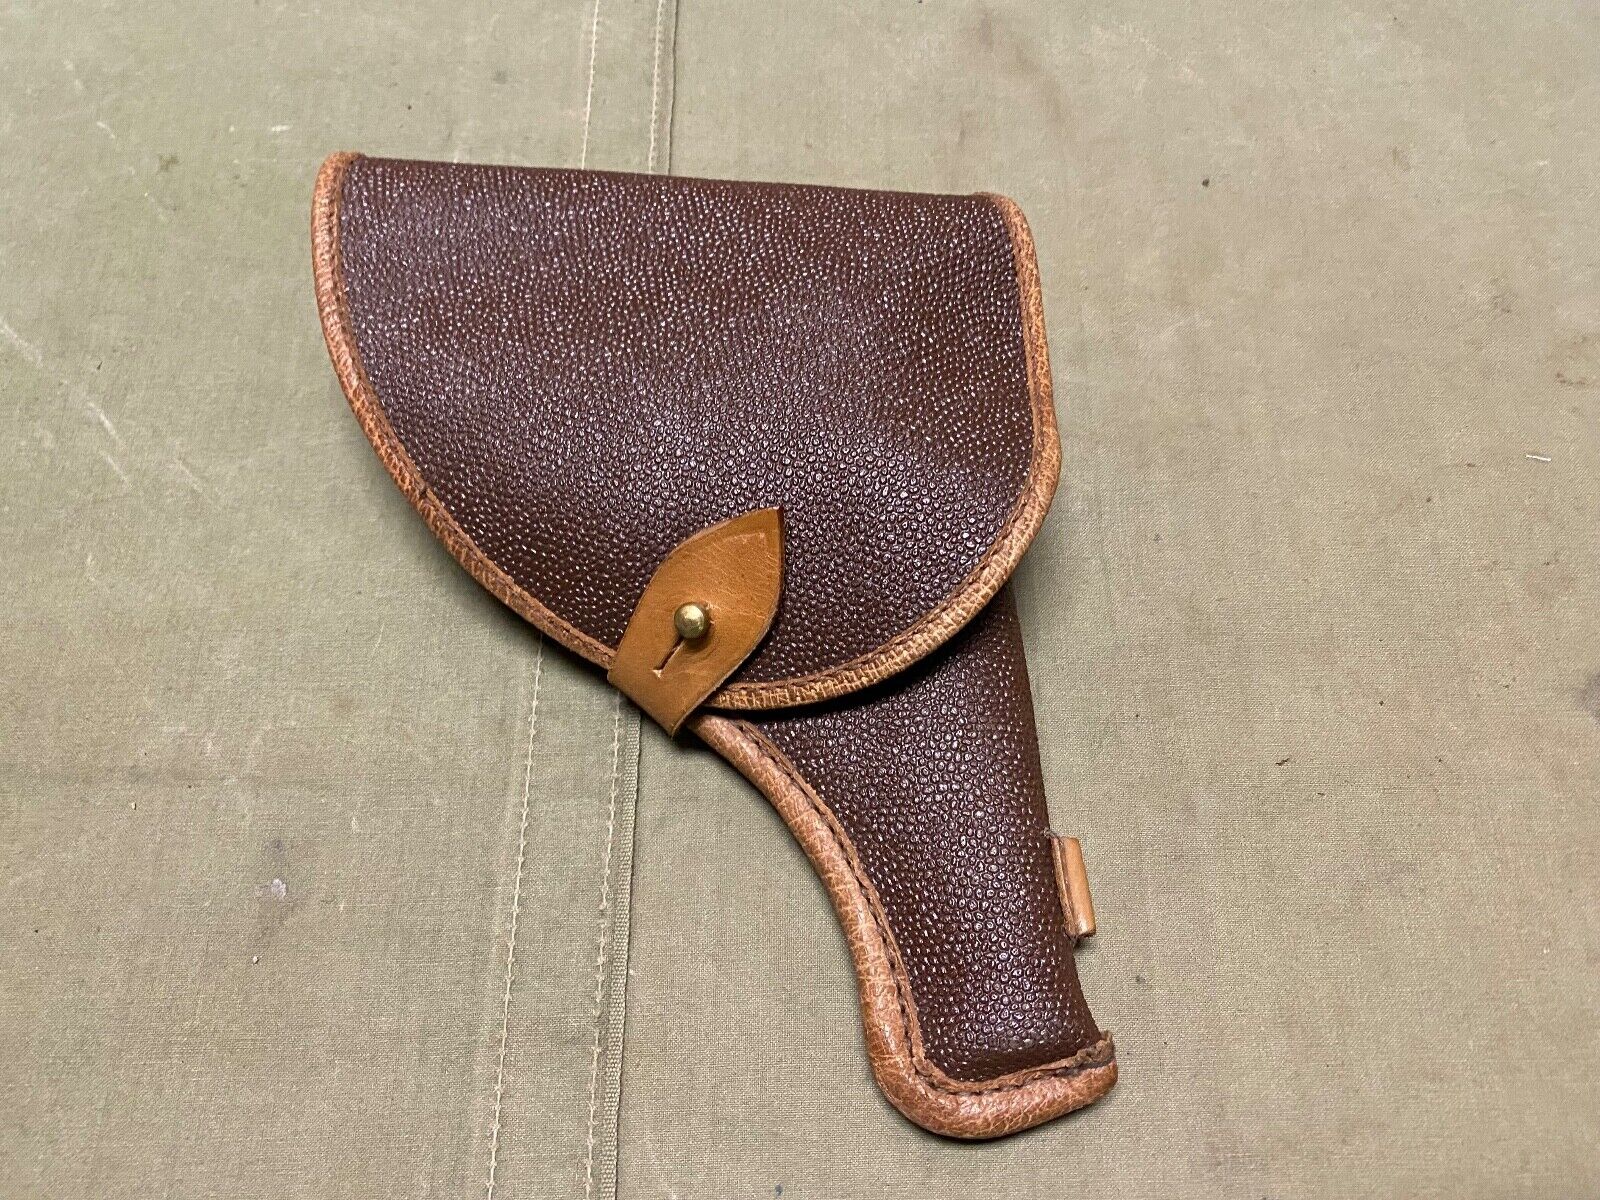 WWII SOVIET RUSSIA M1923 M1895 NAGANT REVOLVER PISTOL LEATHER CARRY HOLSTER